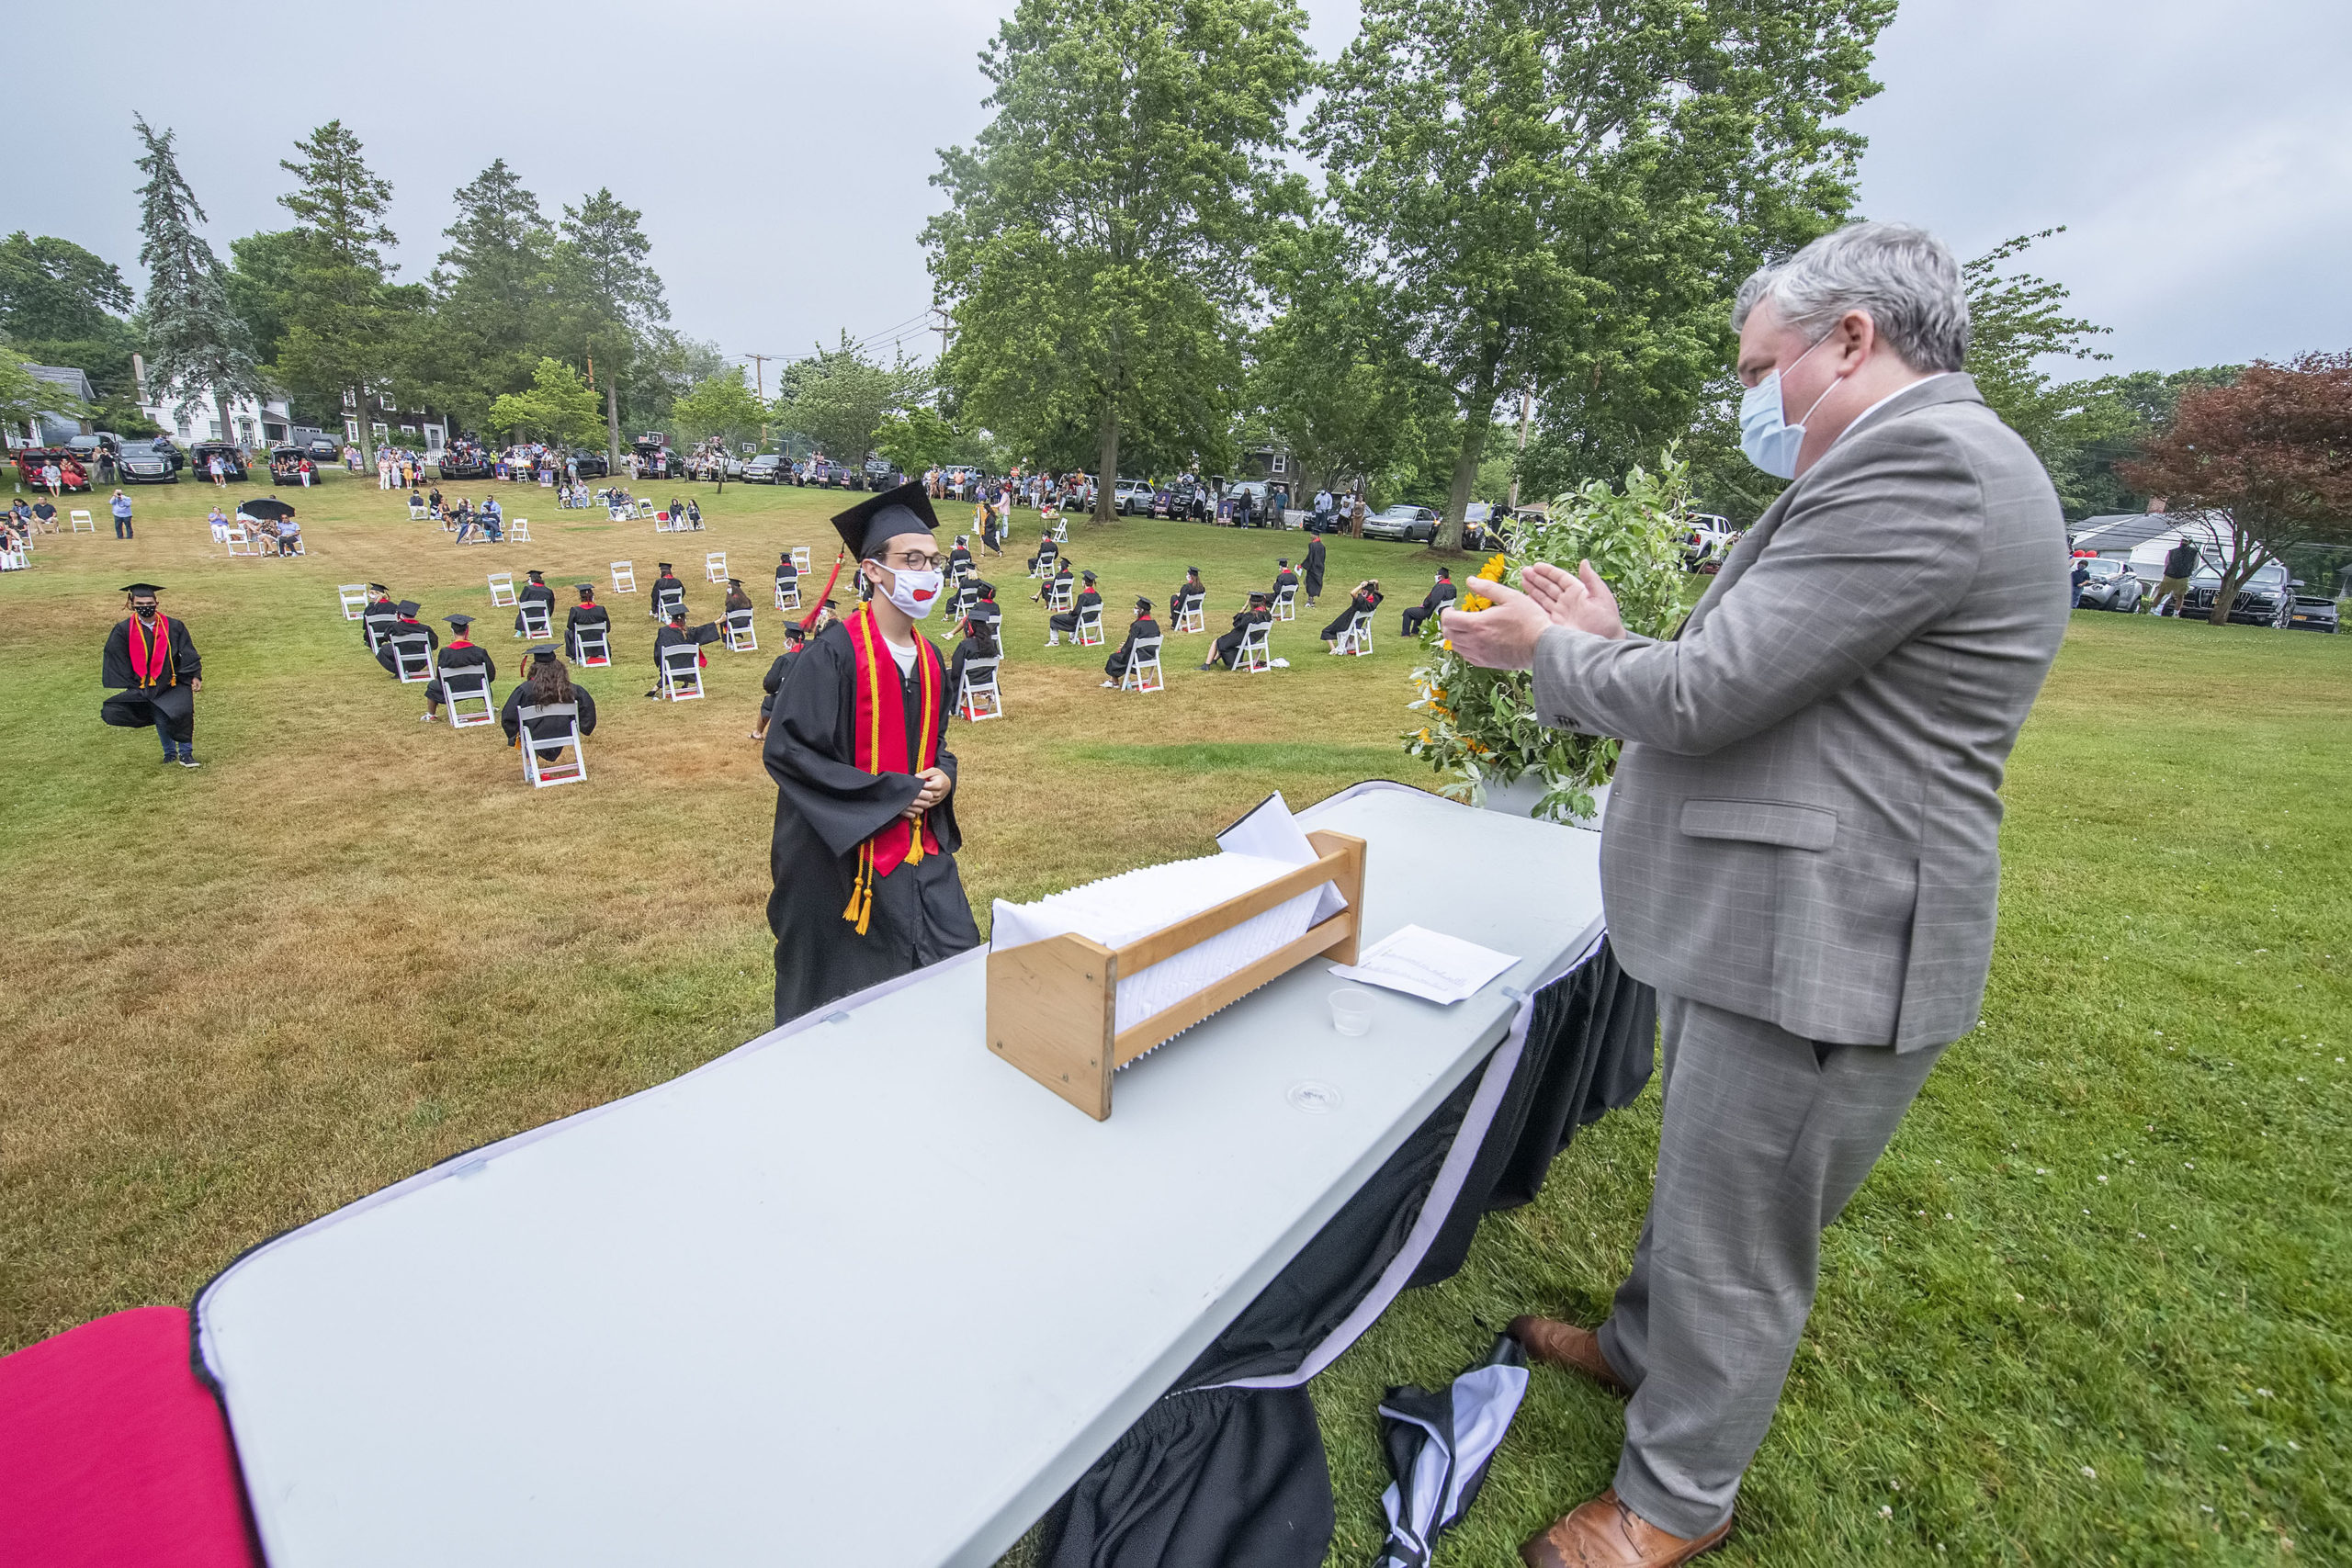 Pierson High School Assistant Principal Mike Guinan applauds Yanni Bitis as he steps up to take his diploma during the Pierson High School 2020 Commencement Ceremony at Pierson High School on Saturday.